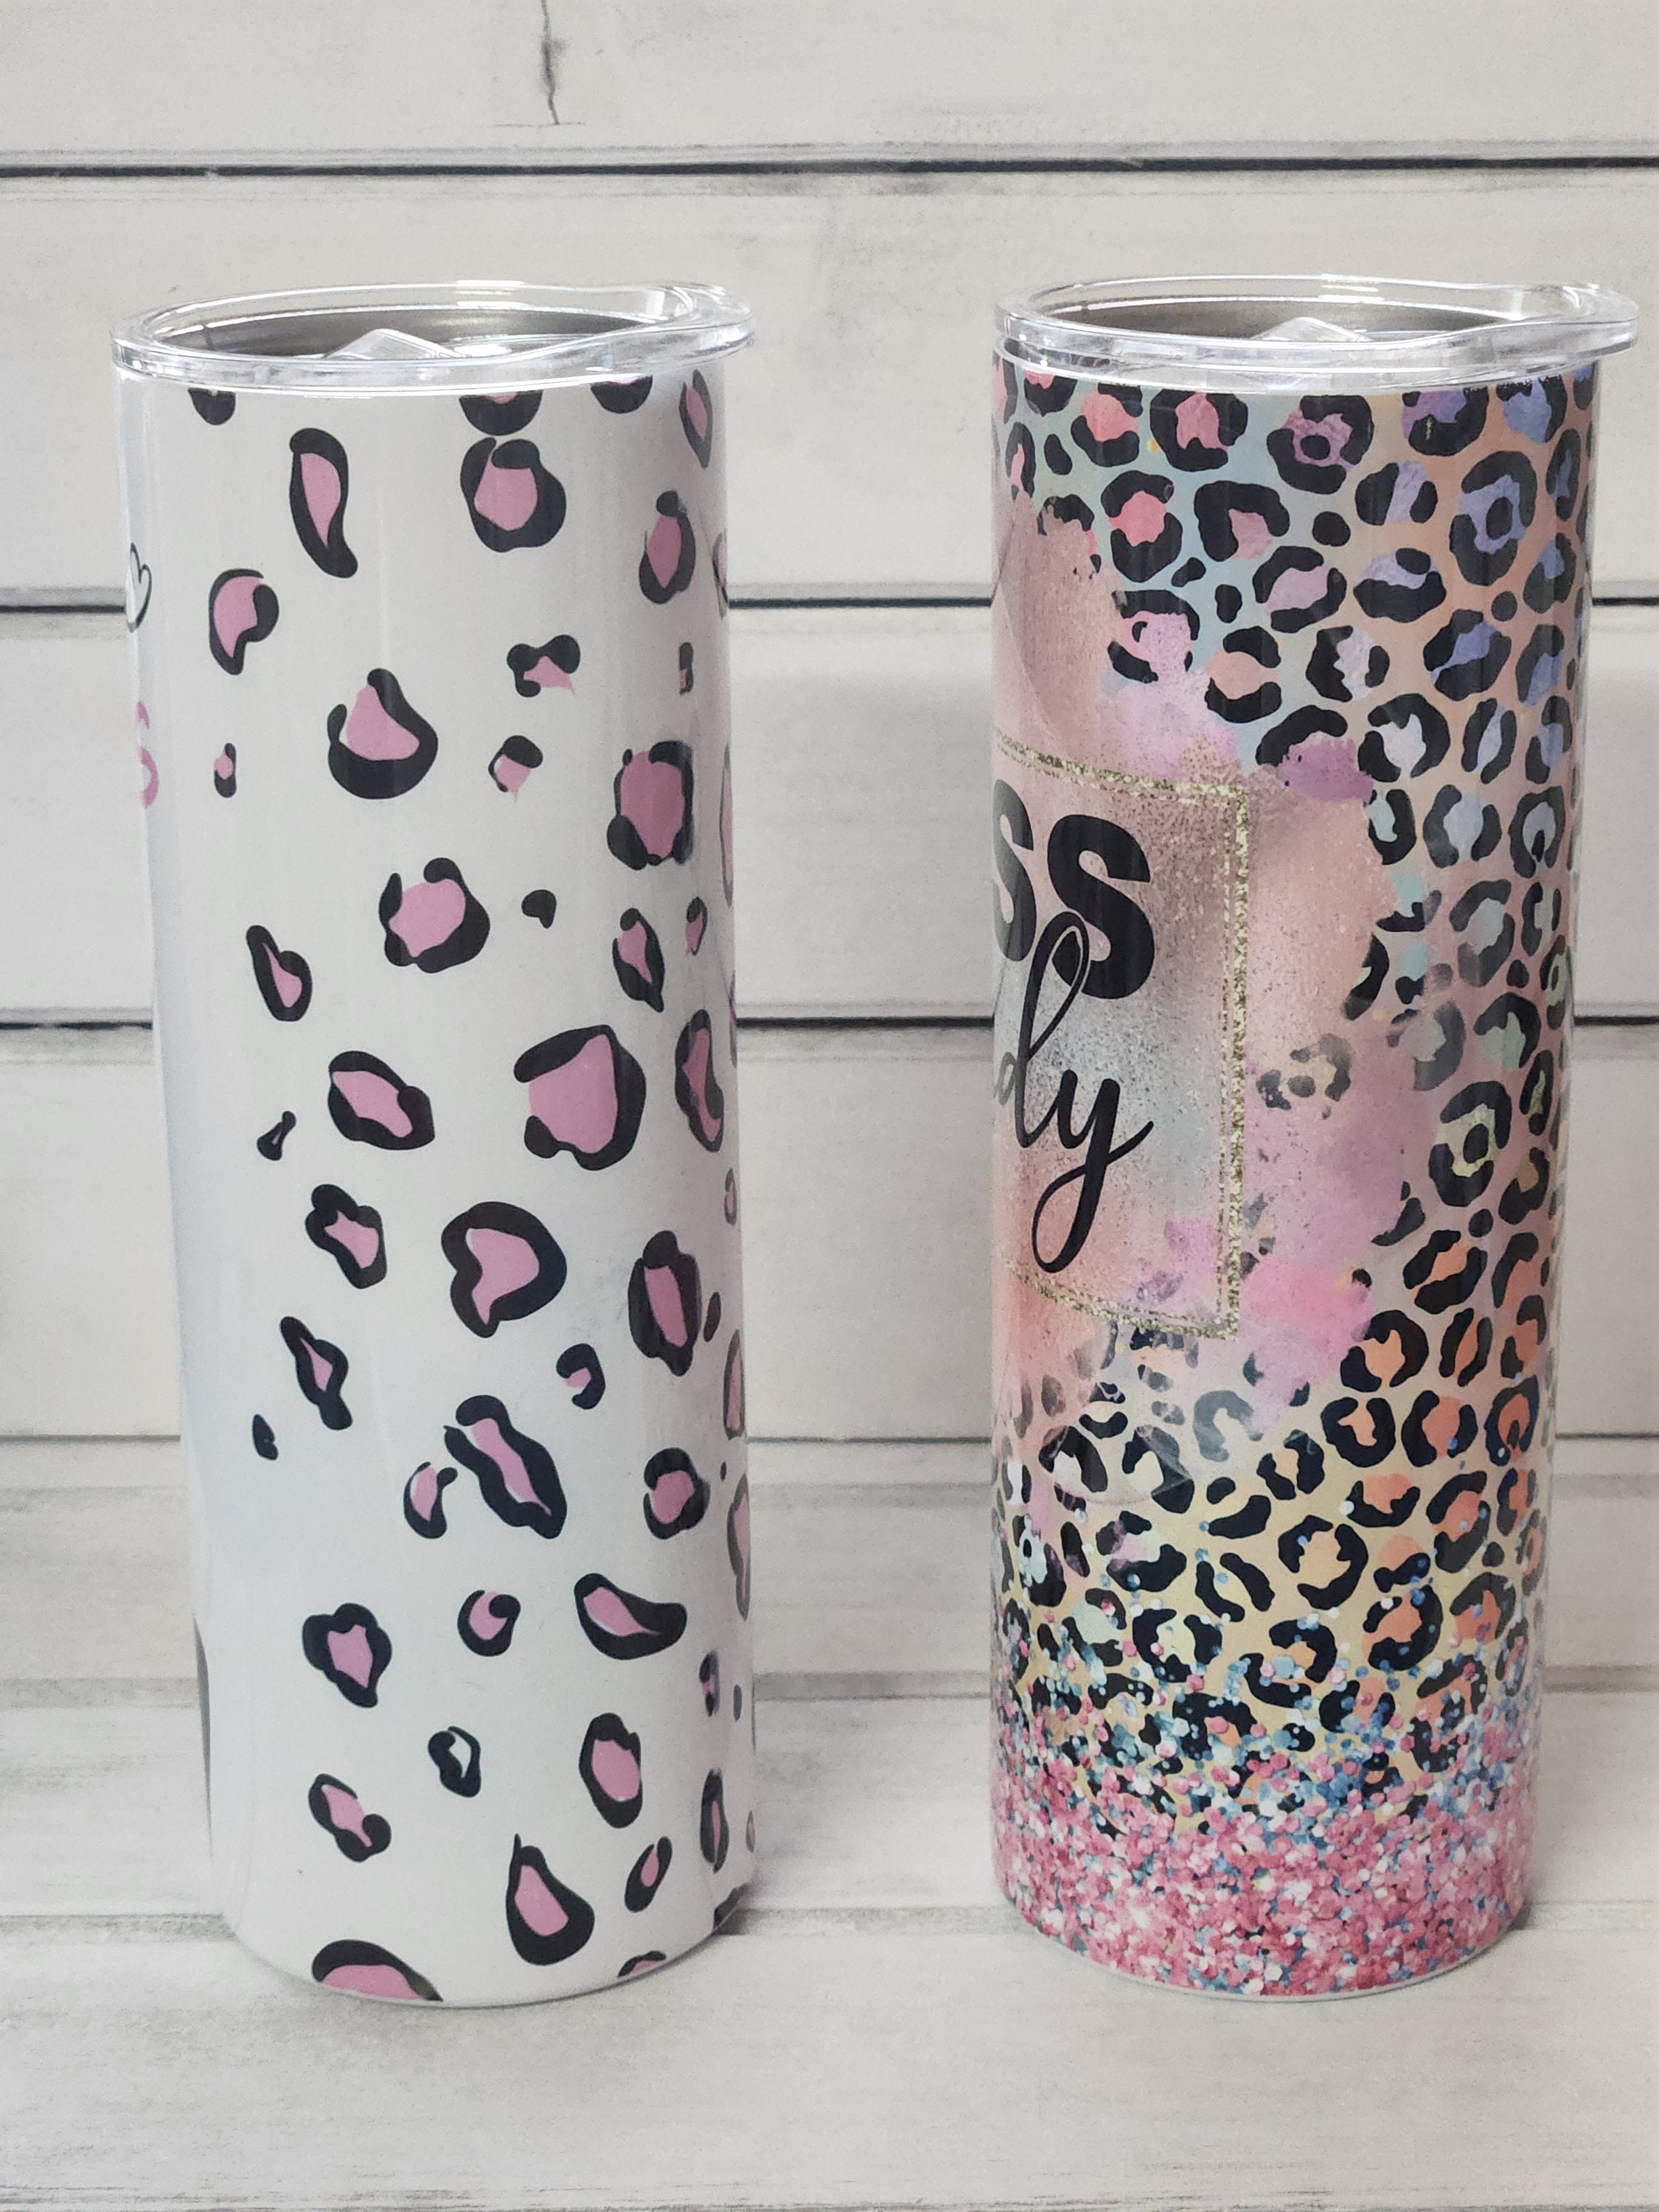 Sassy Girl Pens – The Pink Leopard